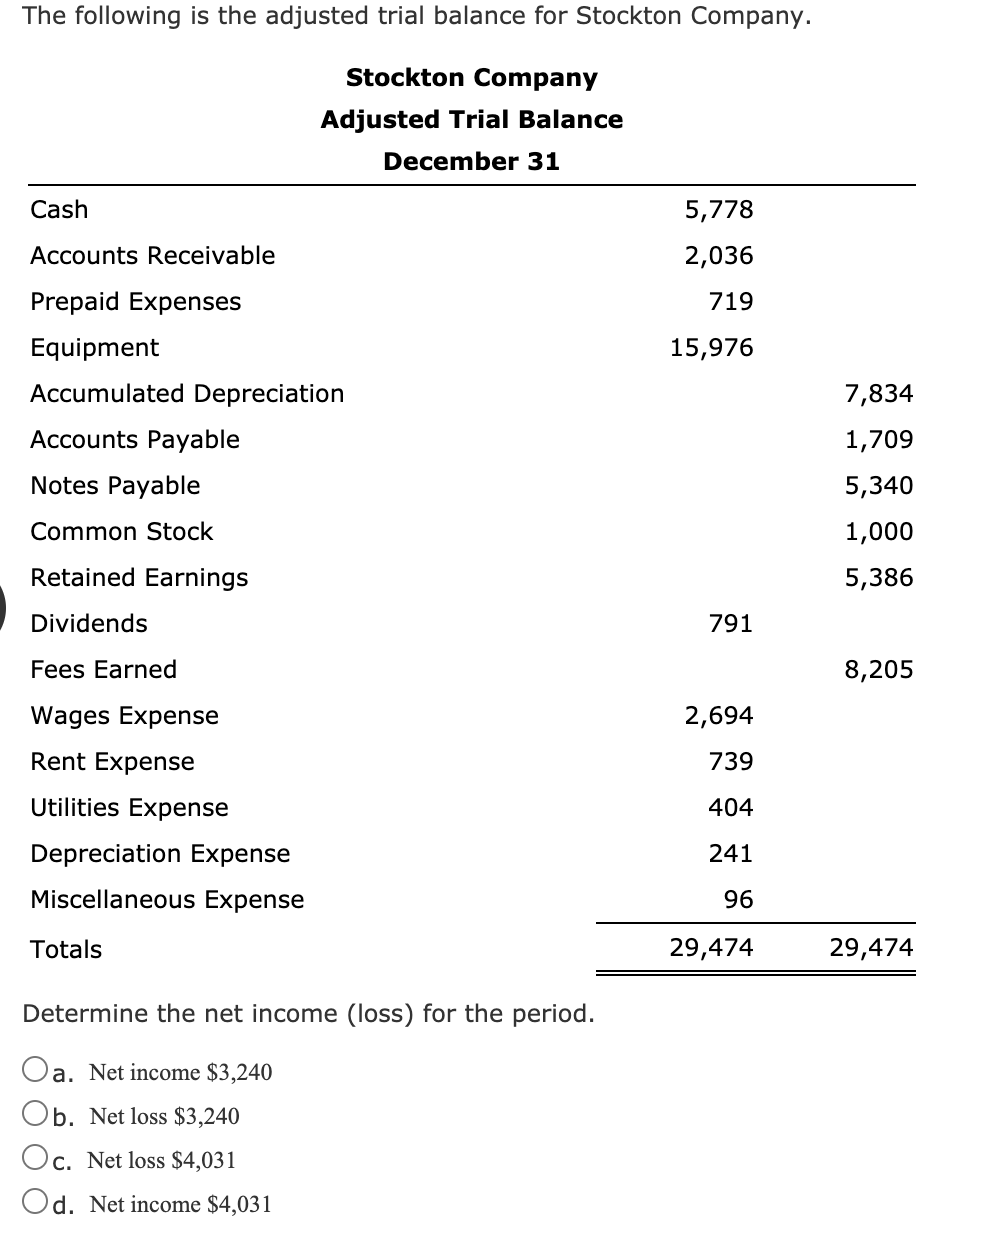 The following is the adjusted trial balance for Stockton Company.
Stockton Company
Adjusted Trial Balance
December 31
Cash
5,778
Accounts Receivable
2,036
Prepaid Expenses
719
Equipment
15,976
Accumulated Depreciation
7,834
Accounts Payable
1,709
Notes Payable
5,340
Common Stock
1,000
Retained Earnings
5,386
Dividends
791
Fees Earned
8,205
Wages Expense
2,694
Rent Expense
739
Utilities Expense
404
Depreciation Expense
241
Miscellaneous Expense
96
Totals
29,474
29,474
Determine the net income (loss) for the period.
Oa. Net income $3,240
Ob. Net loss $3,240
Oc. Net loss $4,031
Od. Net income $4,031
